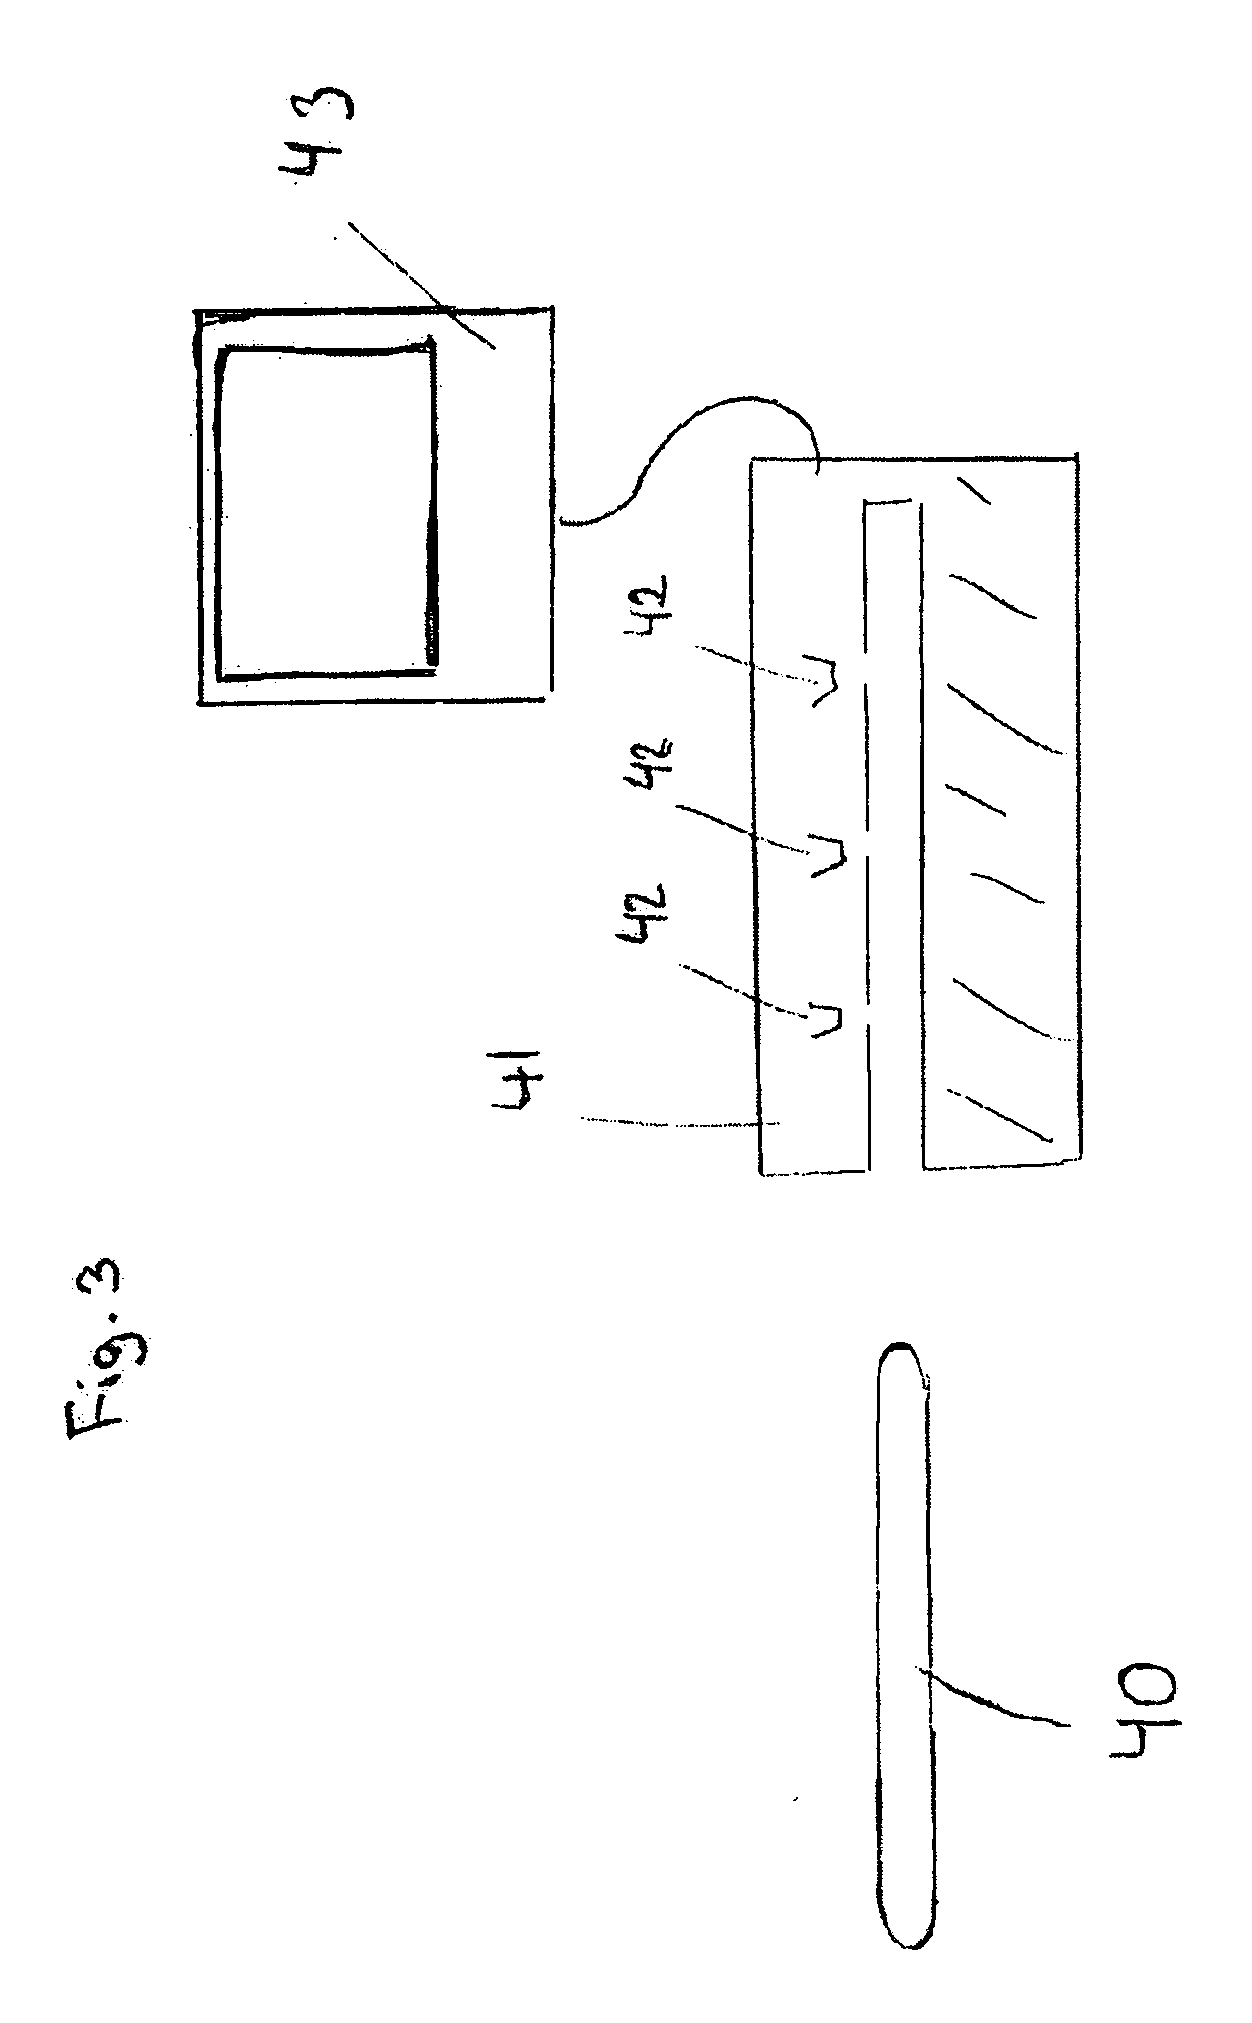 A Flow Through System, Flow Through Device And A Method Of Performing A Test